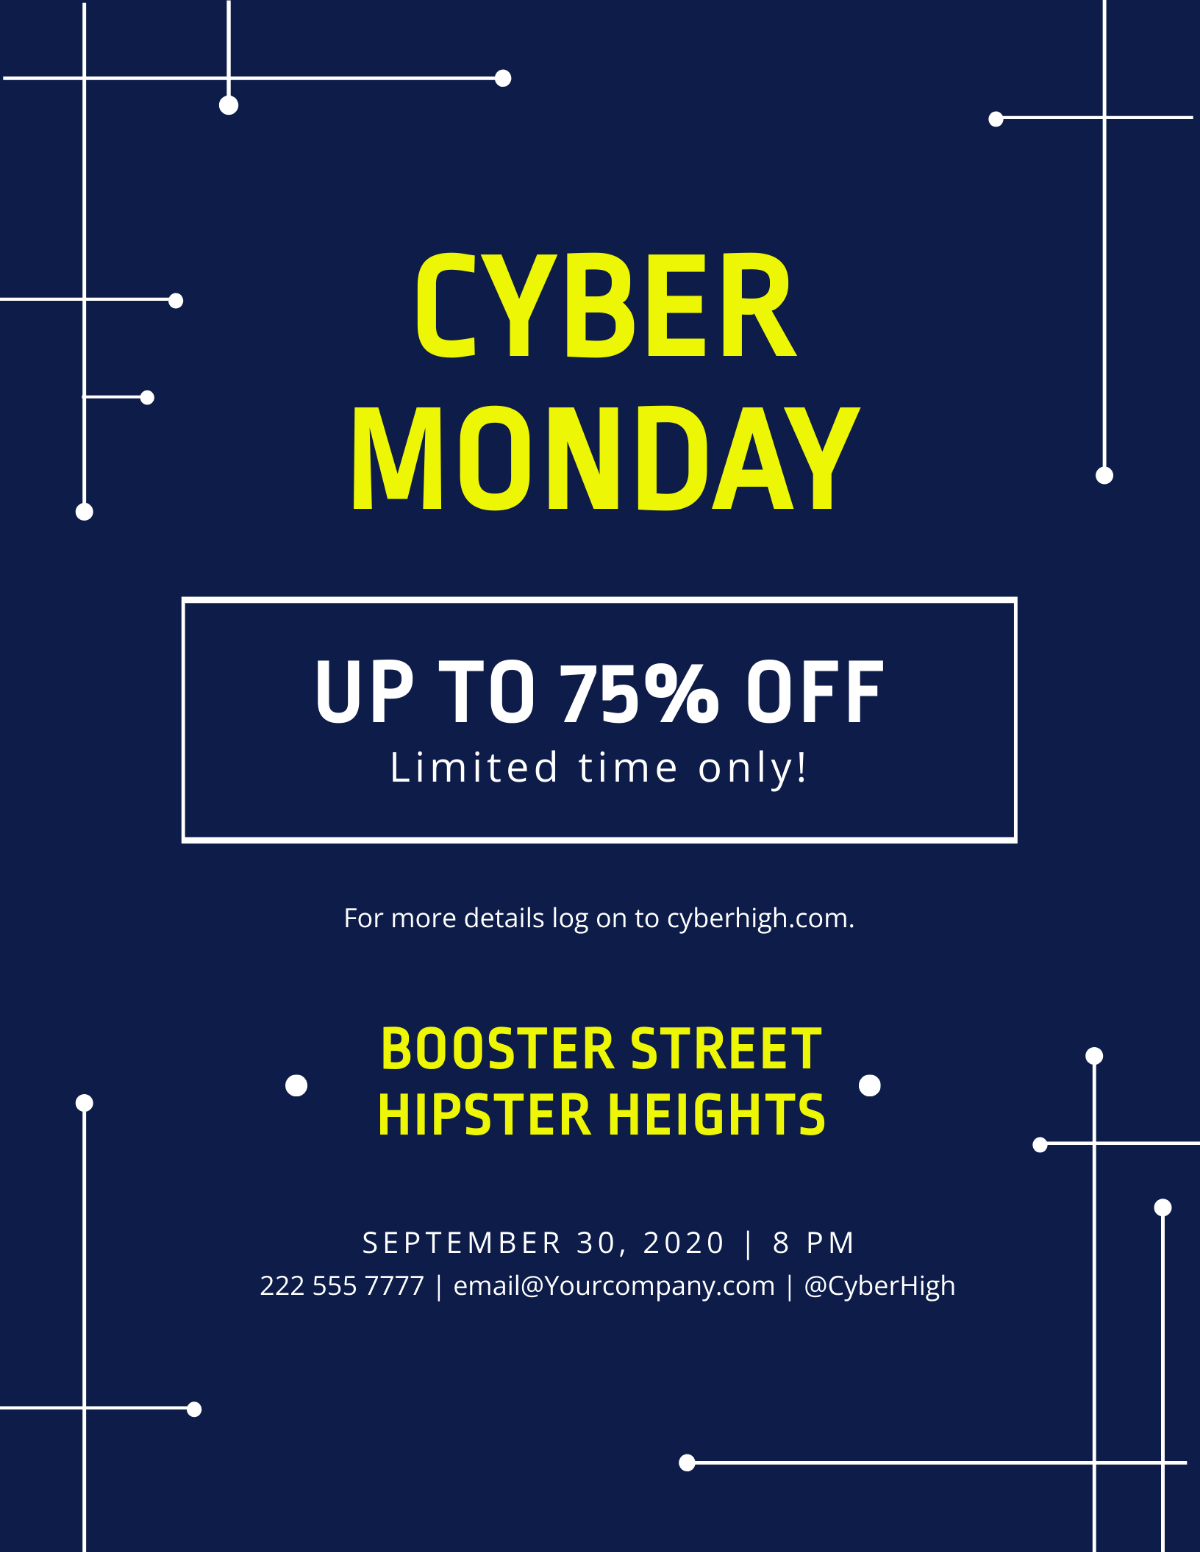 Free Cyber Monday Discount Flyer Template